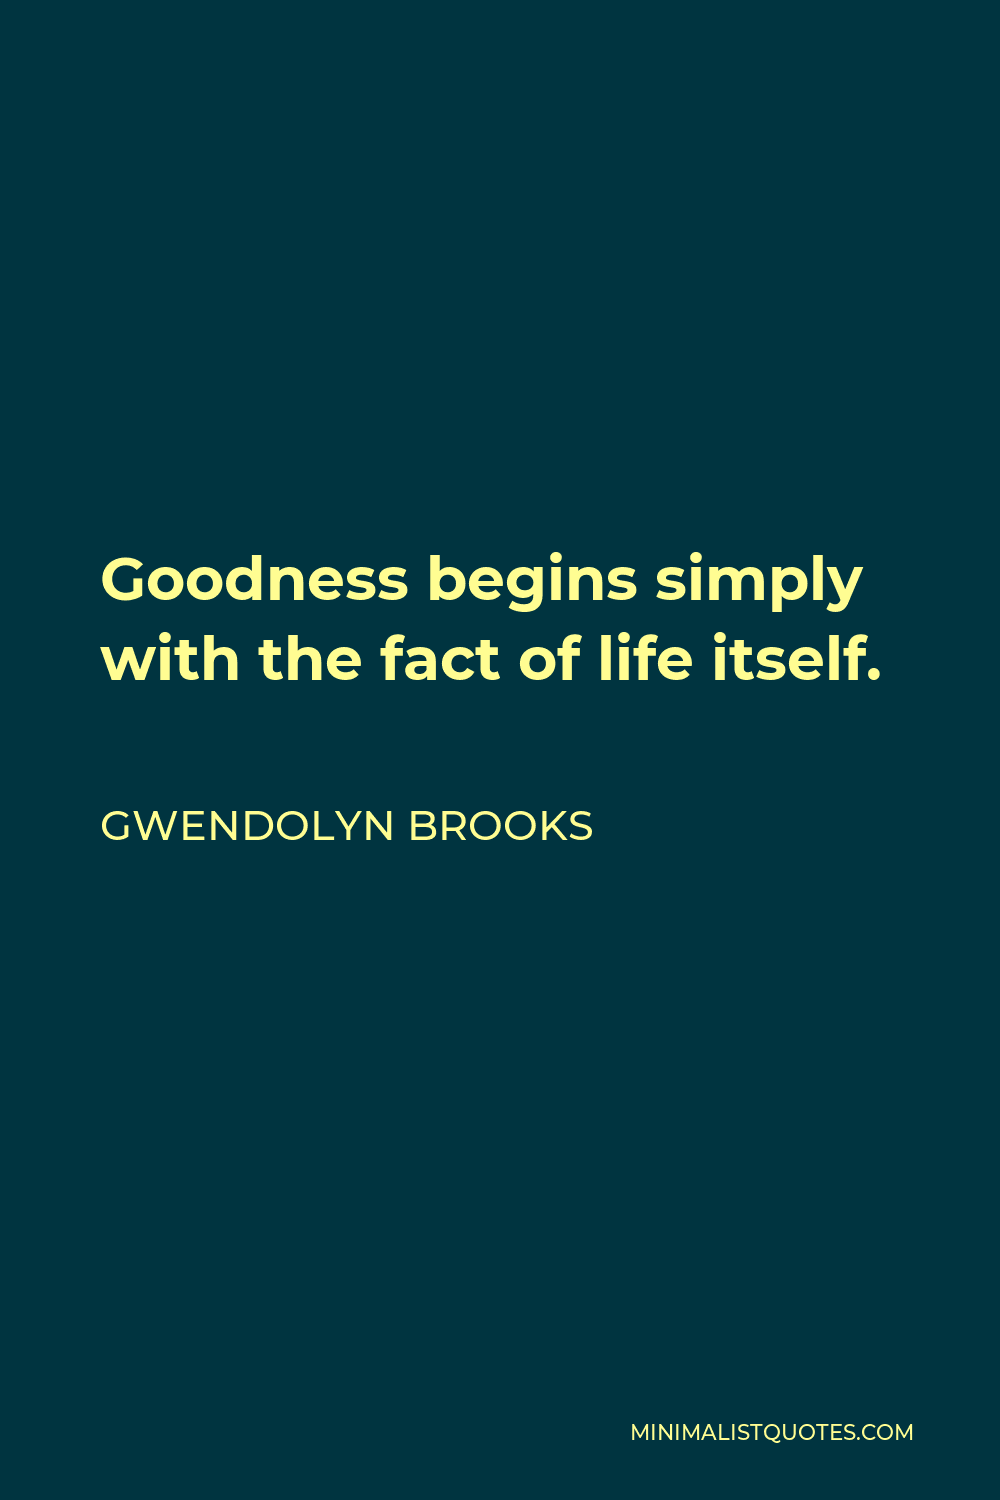 Gwendolyn Brooks Quote - Goodness begins simply with the fact of life itself.